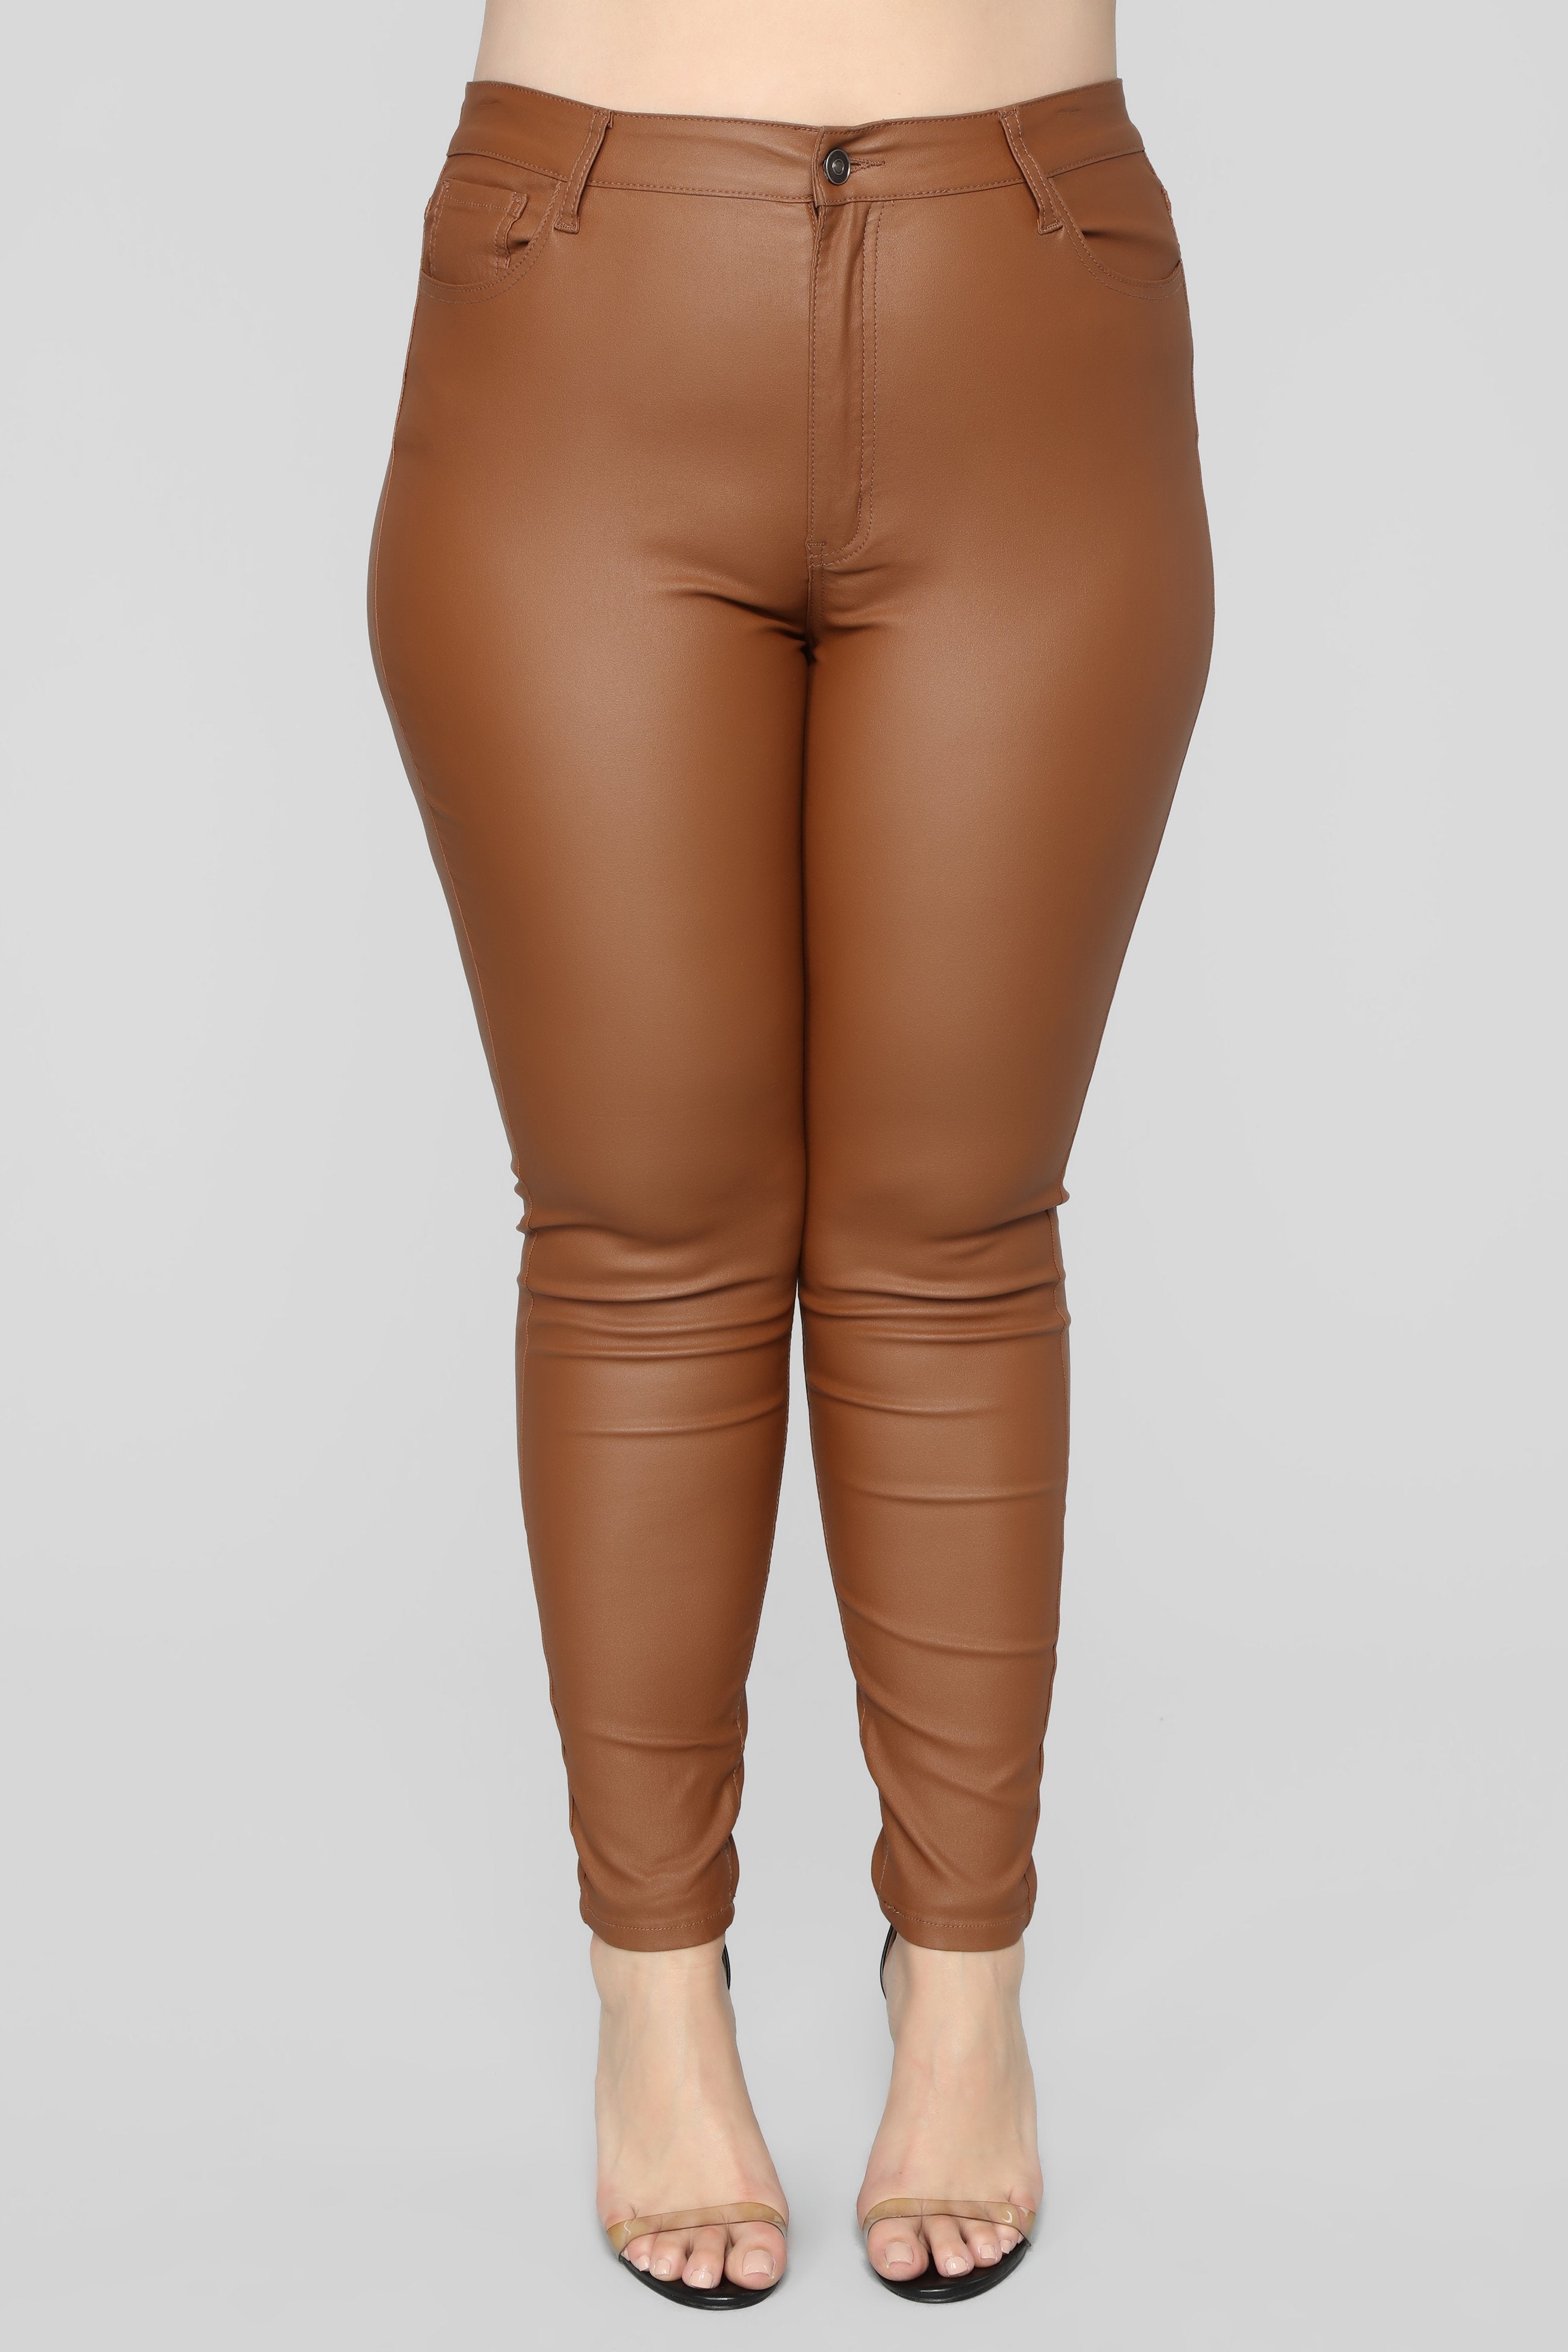 Double Dare Faux Leather Pants - Camel